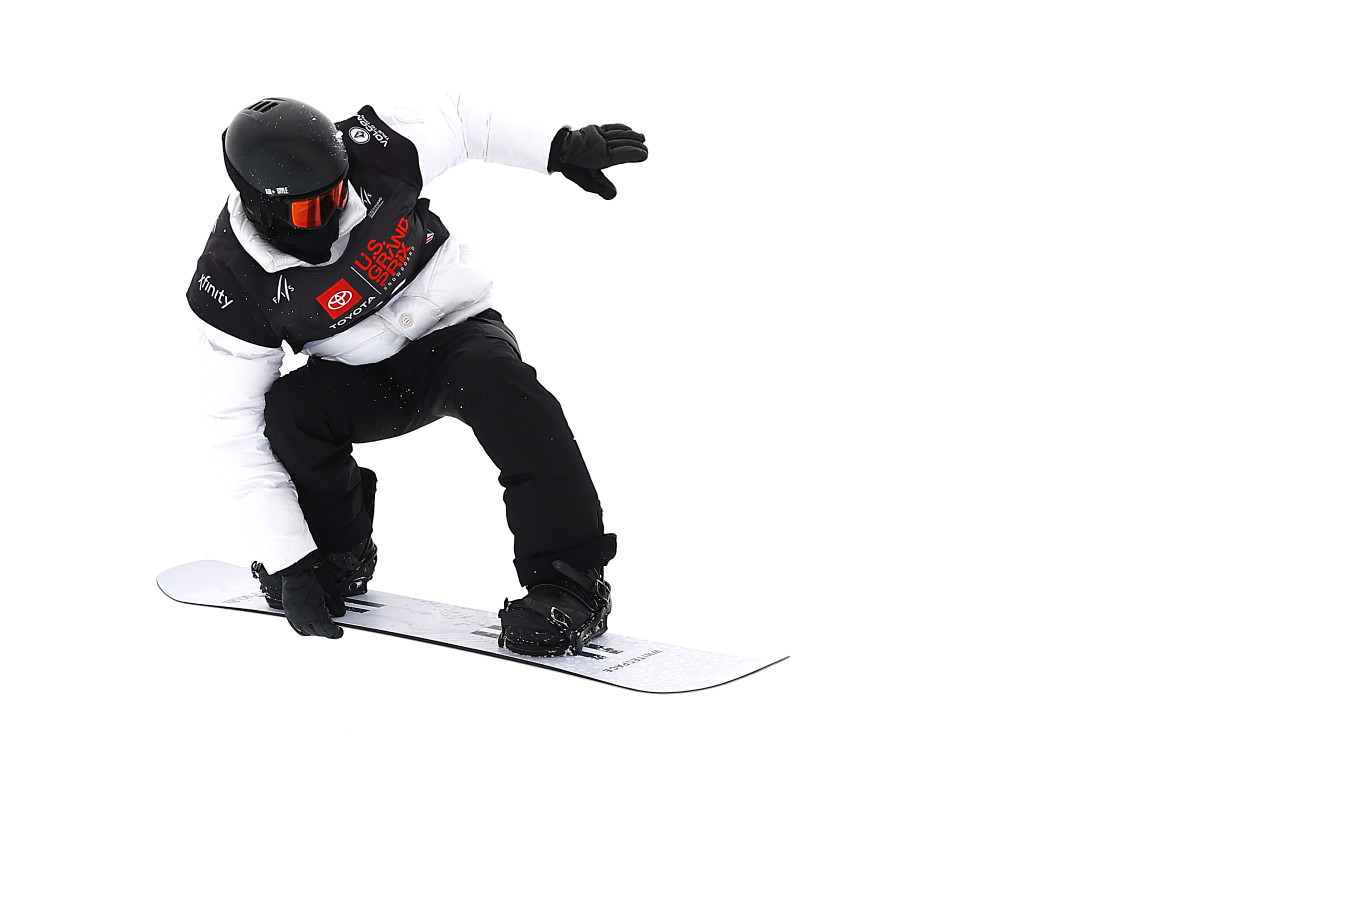 White withdraws from U.S. Snowboarding Championships